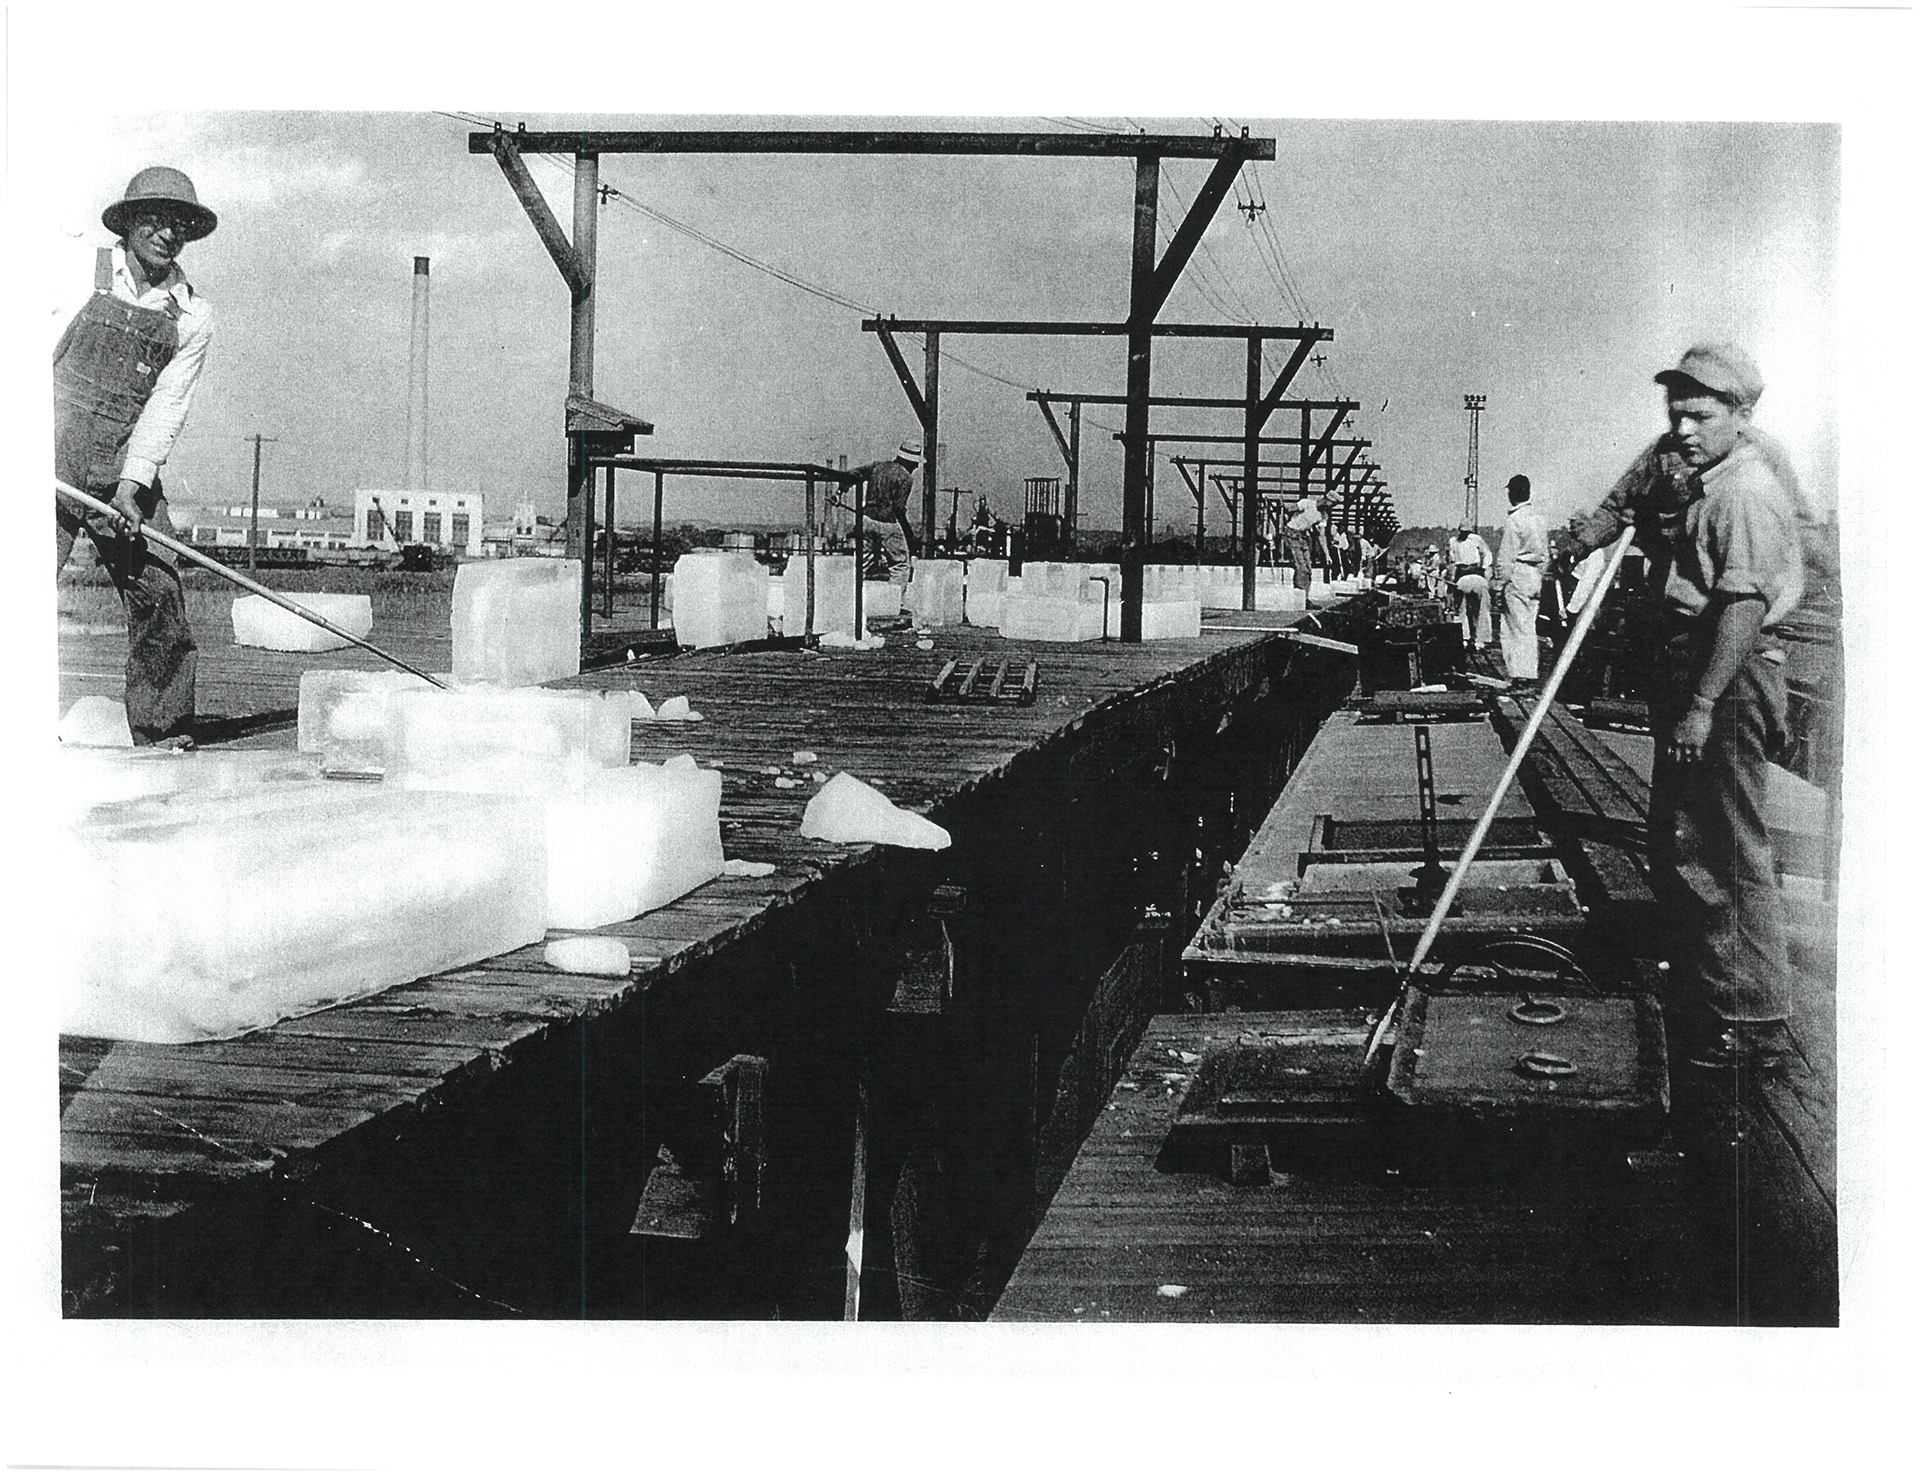 A worker pushes ice across the dock. (Quiroga Family)